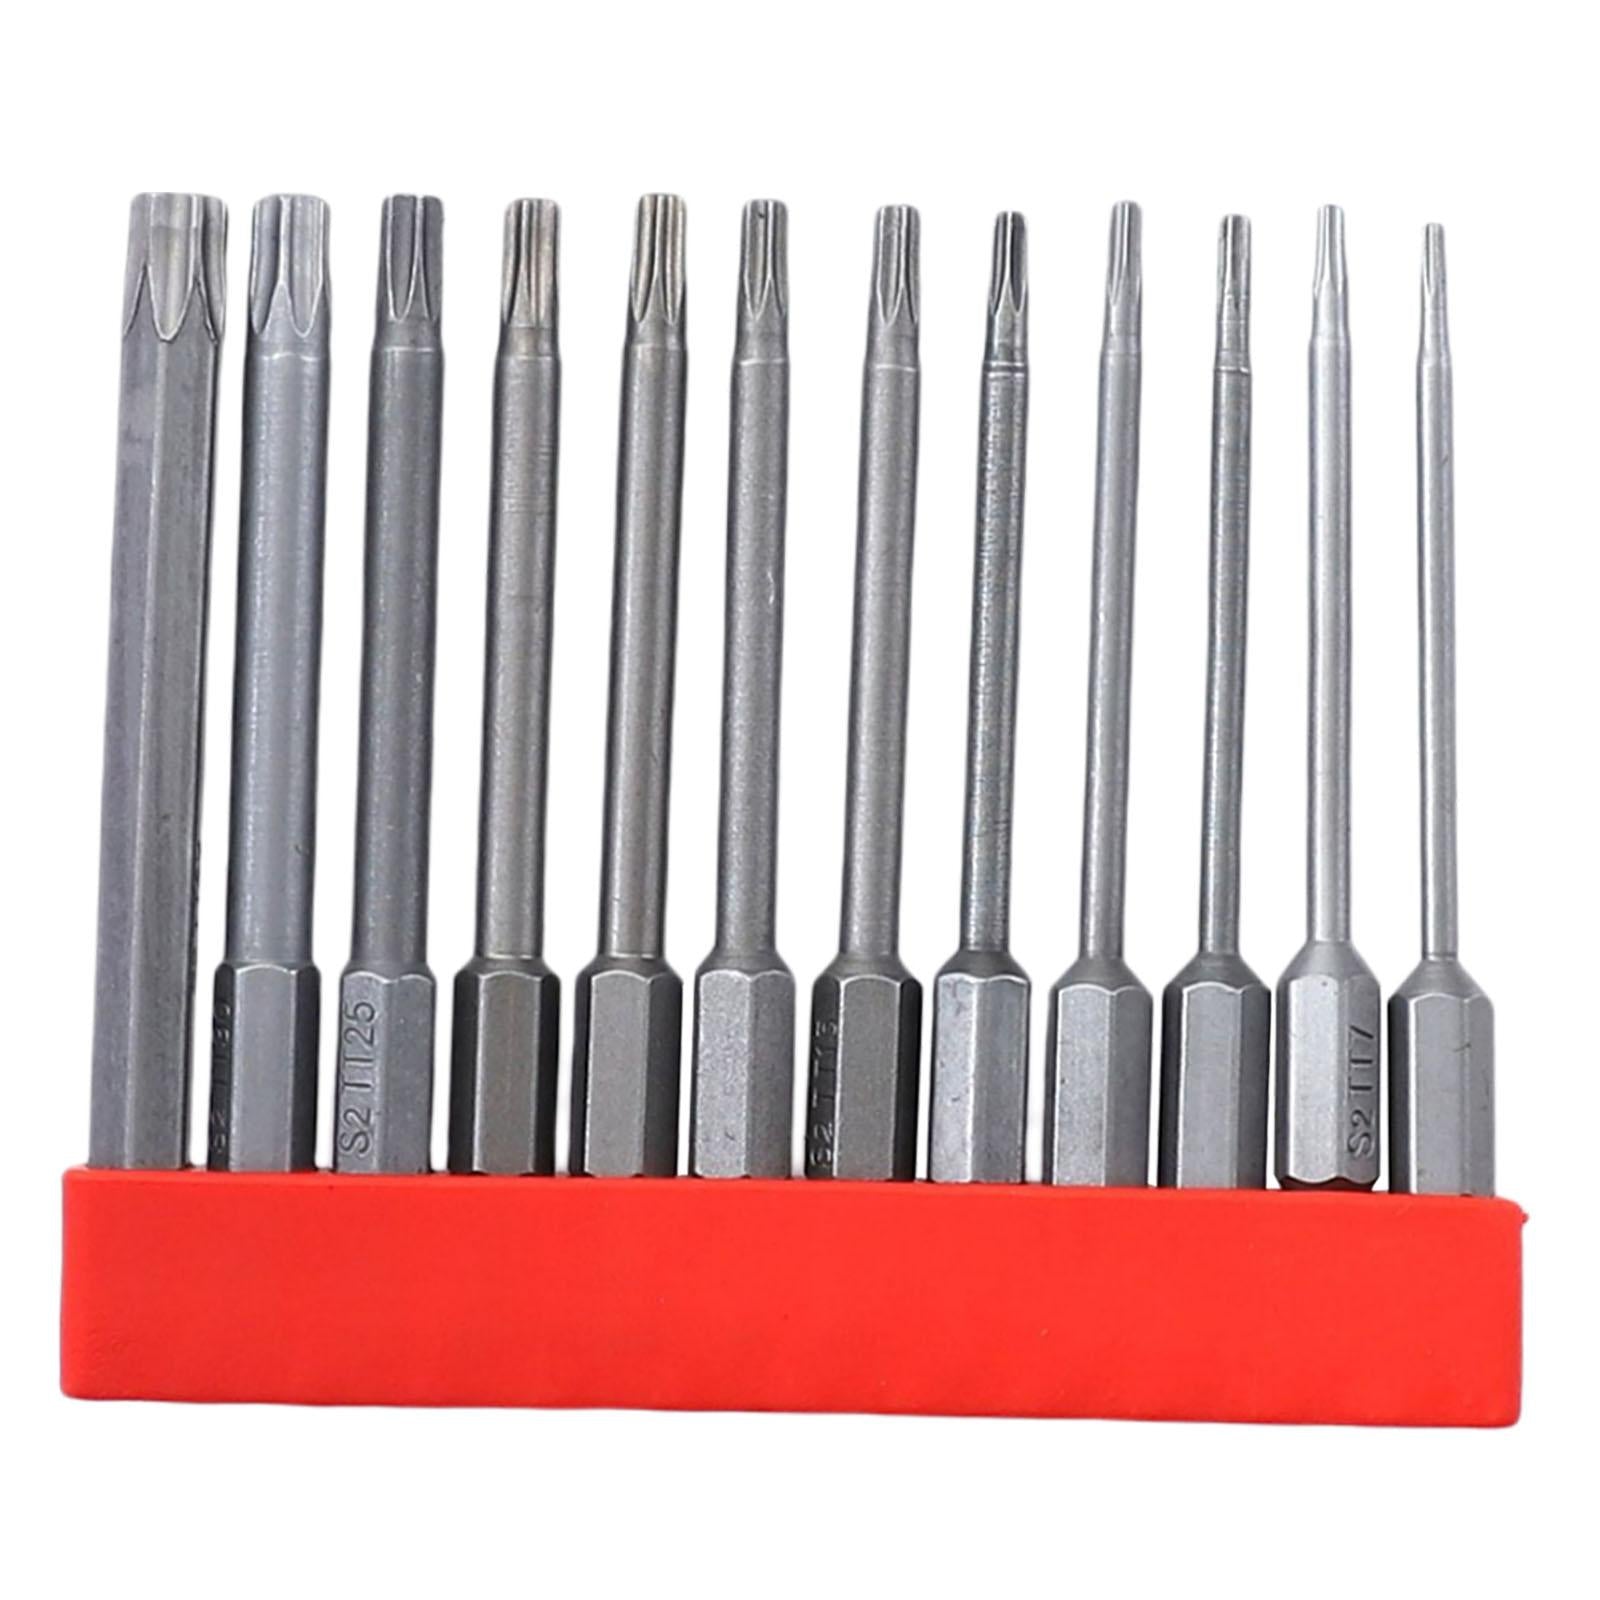 12 Pieces Hollow Rings Wrench Bit Set S2 Alloy Steel Metric for Metalworking 75mm